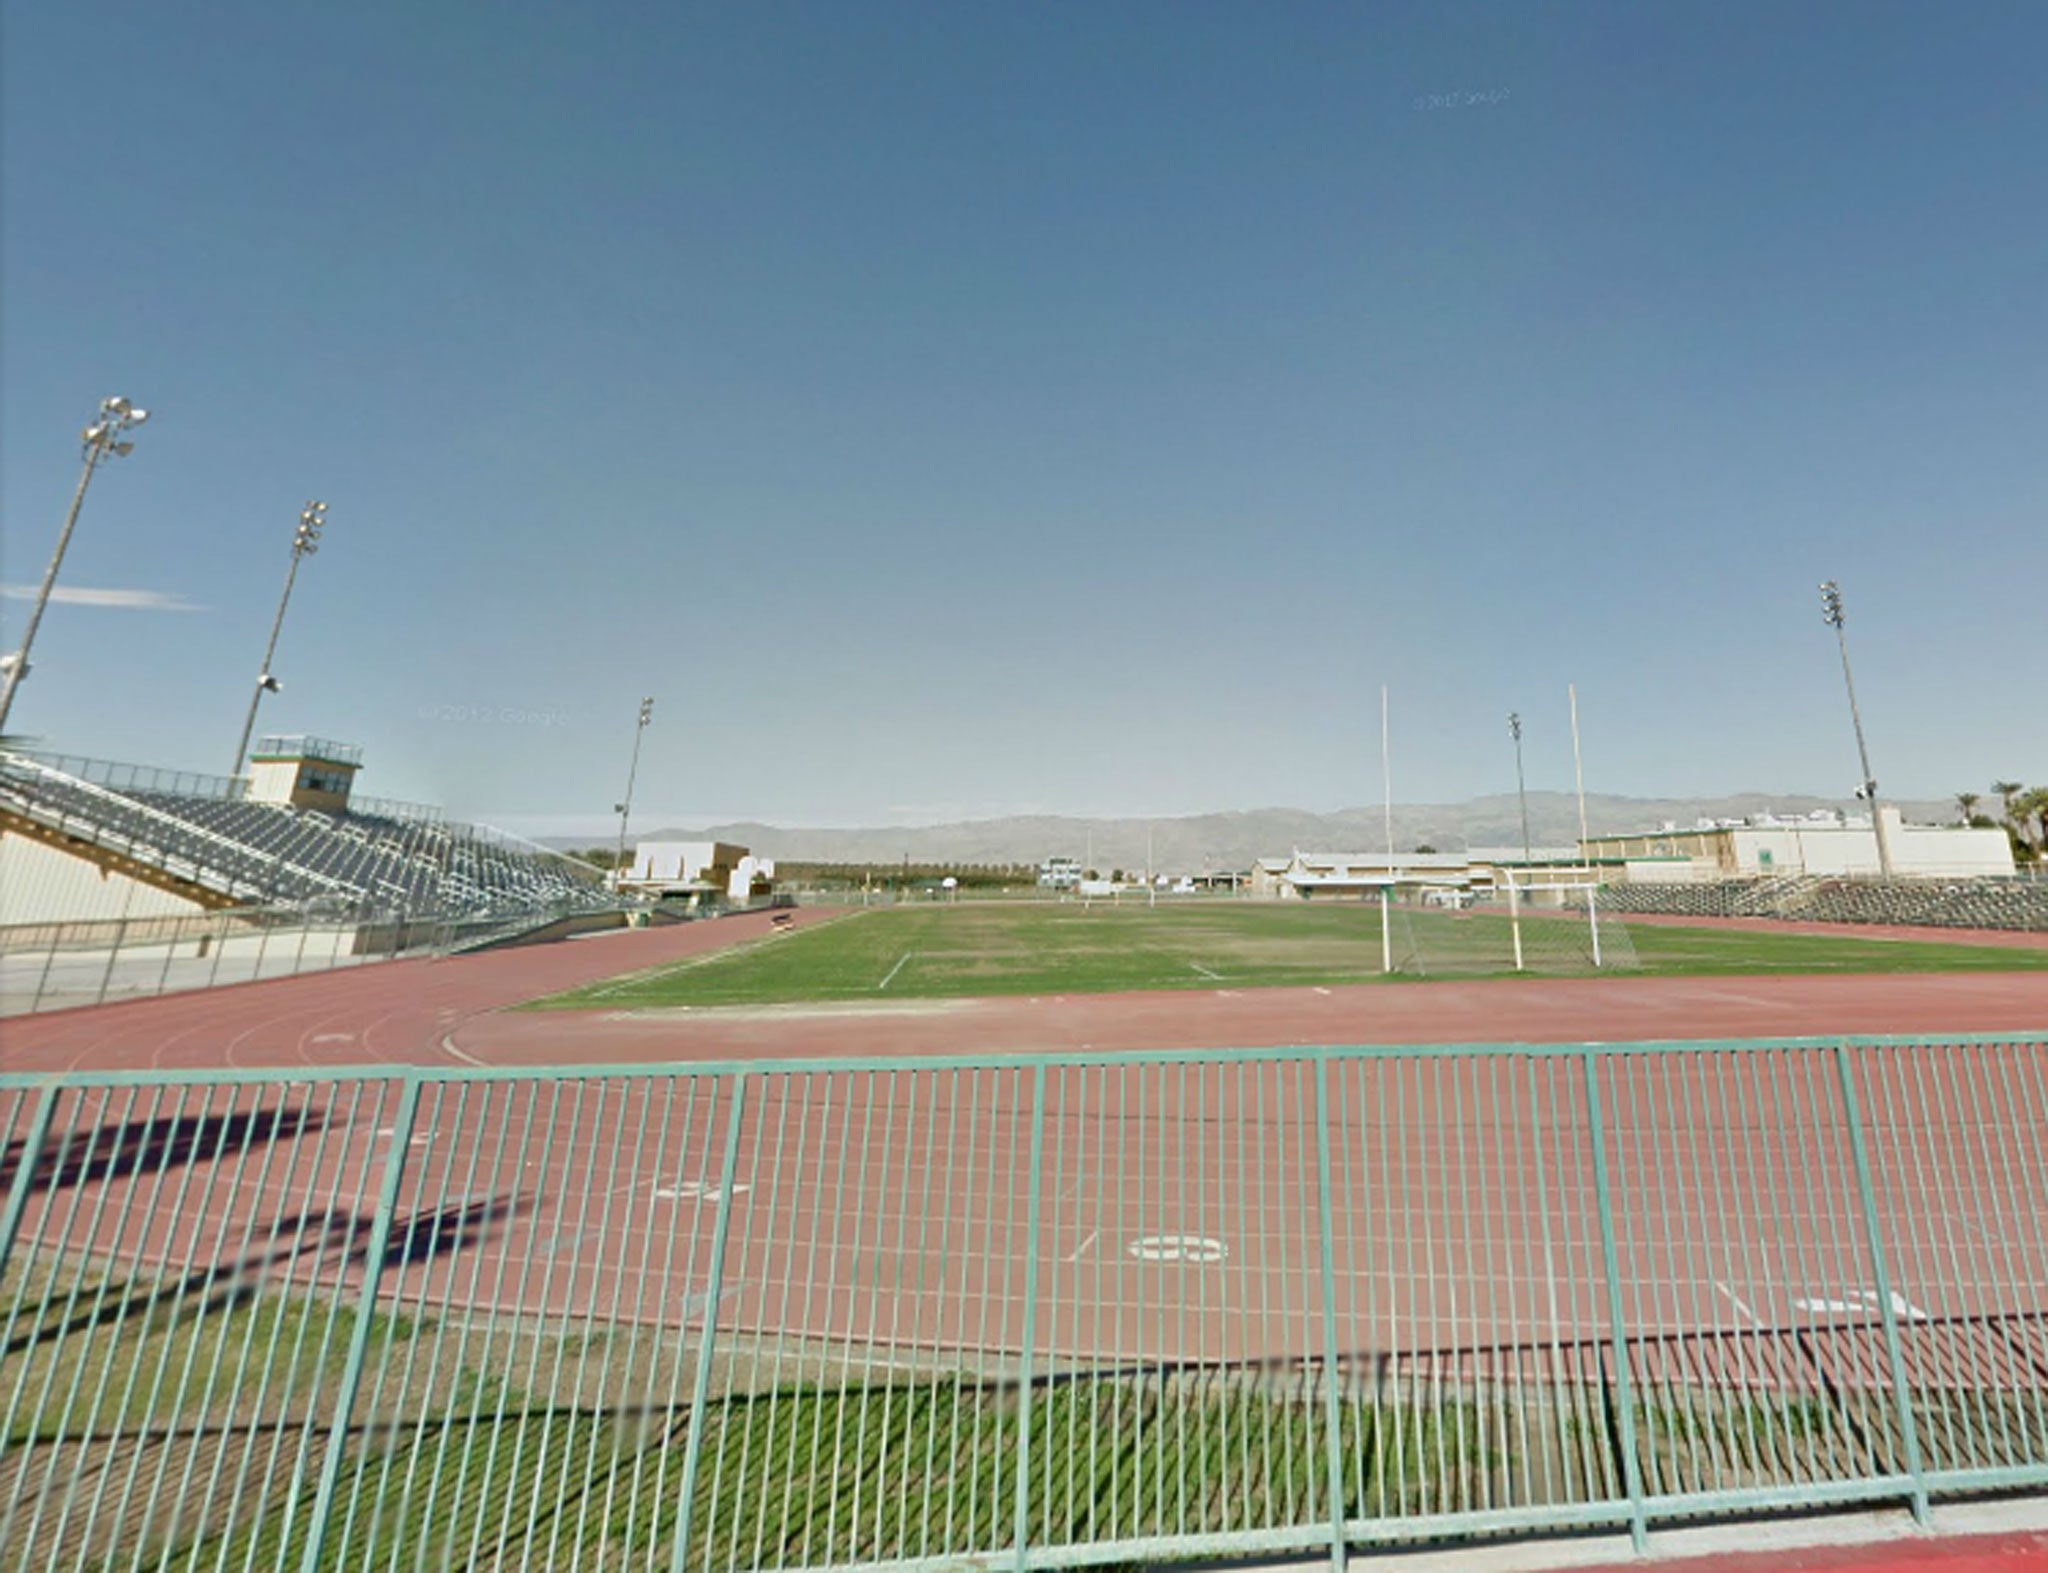 Coachella Valley High School, where the football team is known as "The Arabs"